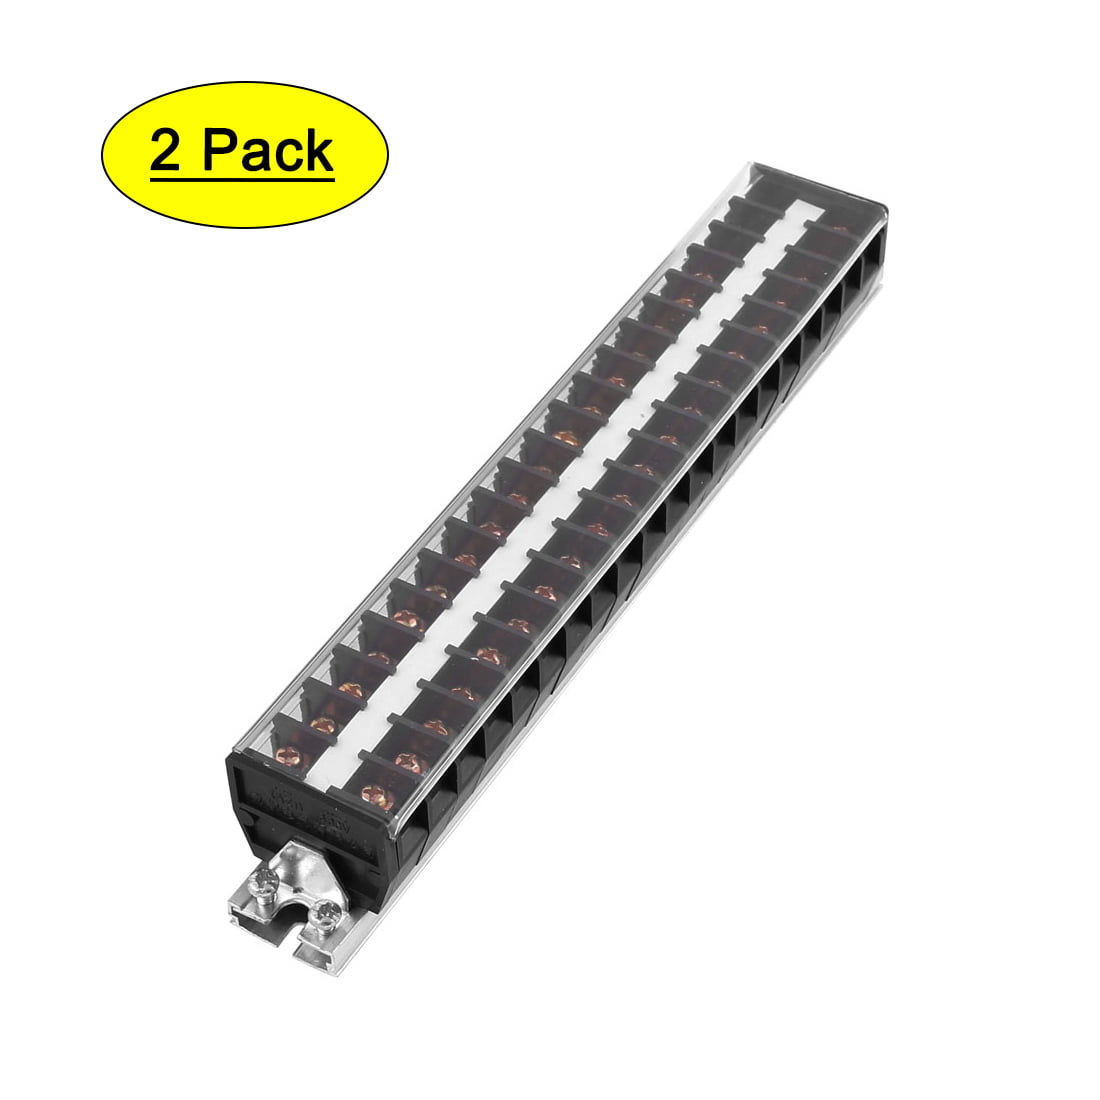 uxcell Barrier Terminal Strip Block 20 Positions 660V 20A Dual Rows DIN Rail Base Screw Connector with Cover TD-2020 